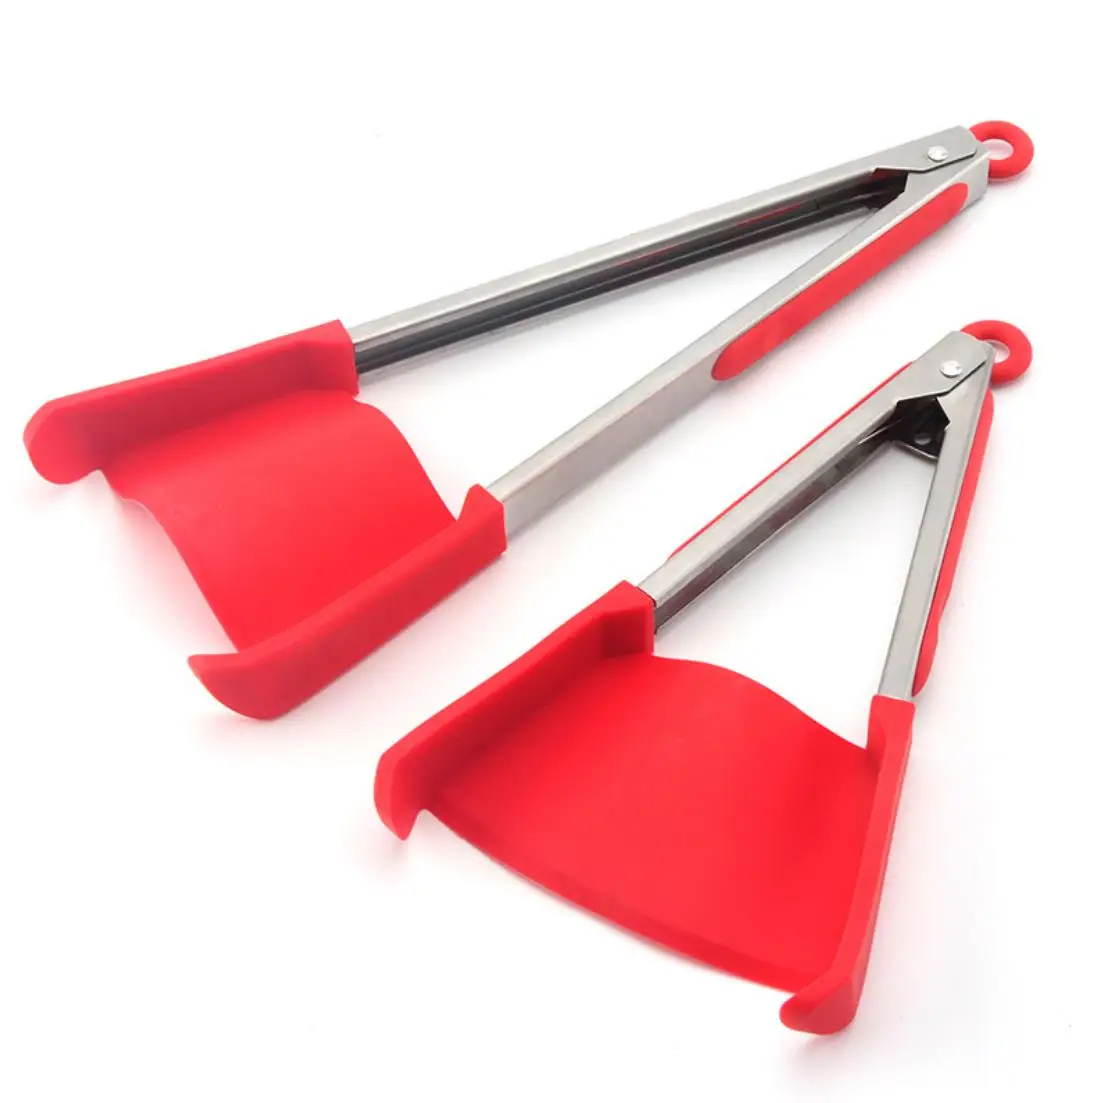 

Kitchen Clip Cool Lock 2 In 1 Kitchen Cooking Spatula Tongs Heat Resistant Silicone Food Cooking Clever Tong, Green/red